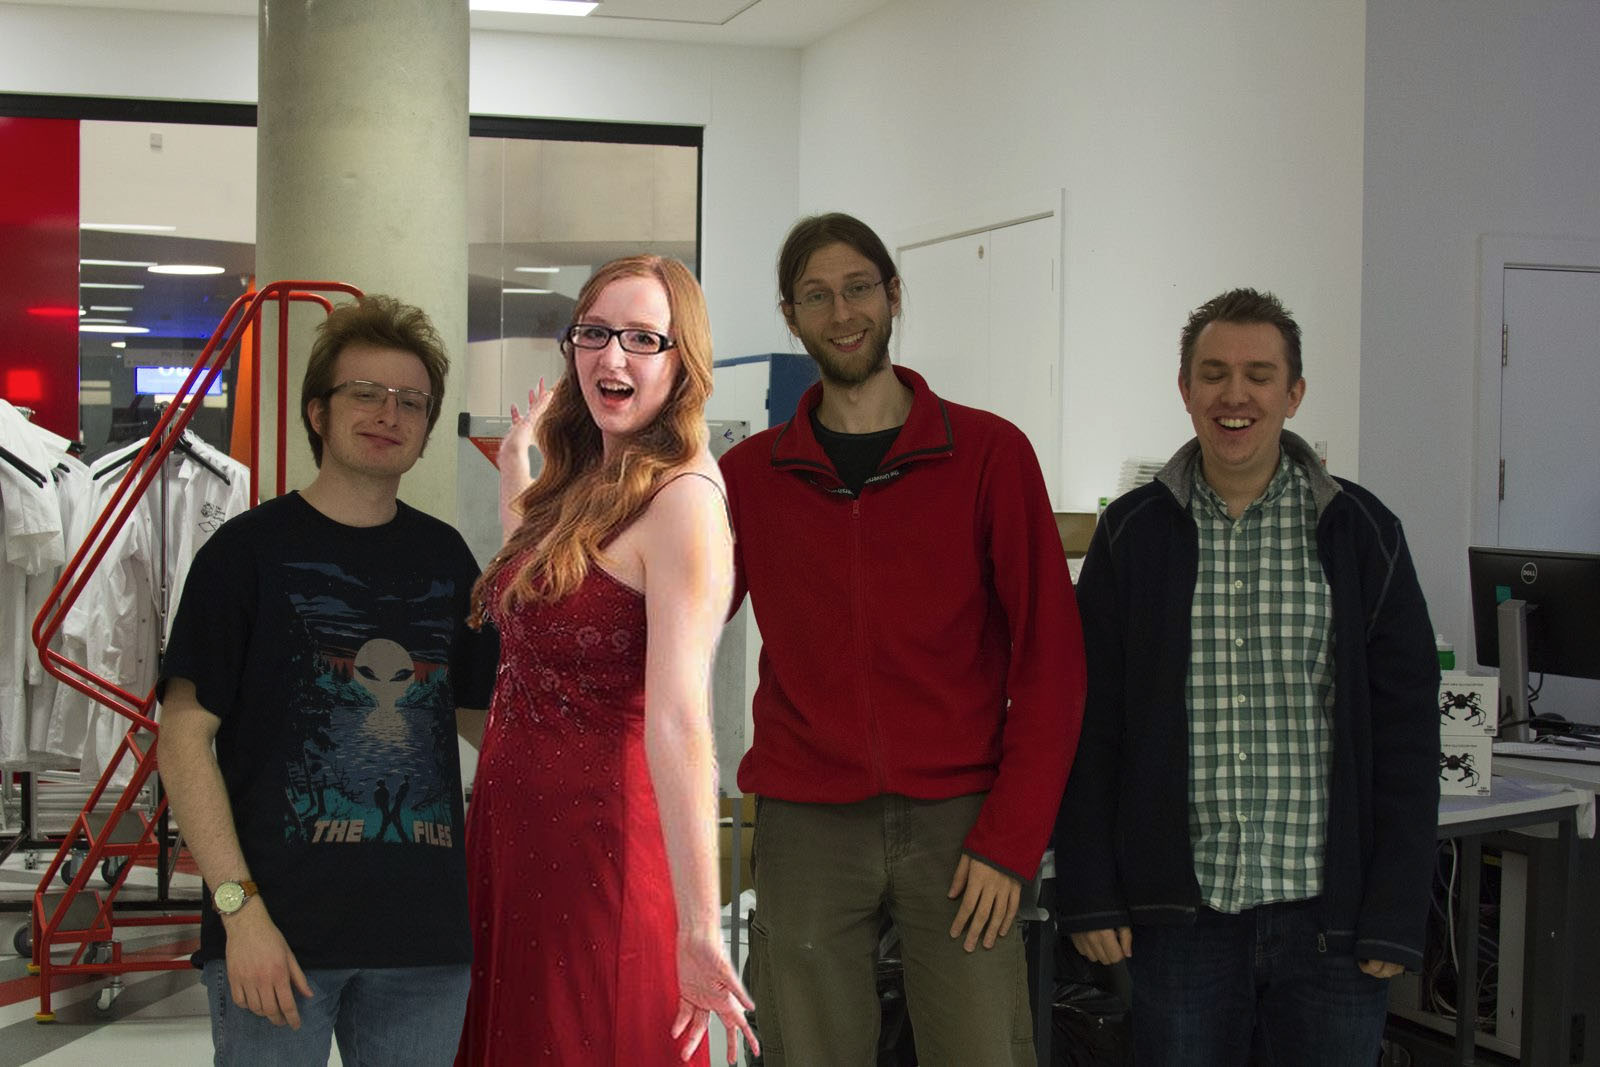 Image Showing all four members of our group - including a photoshopped in Rebecca